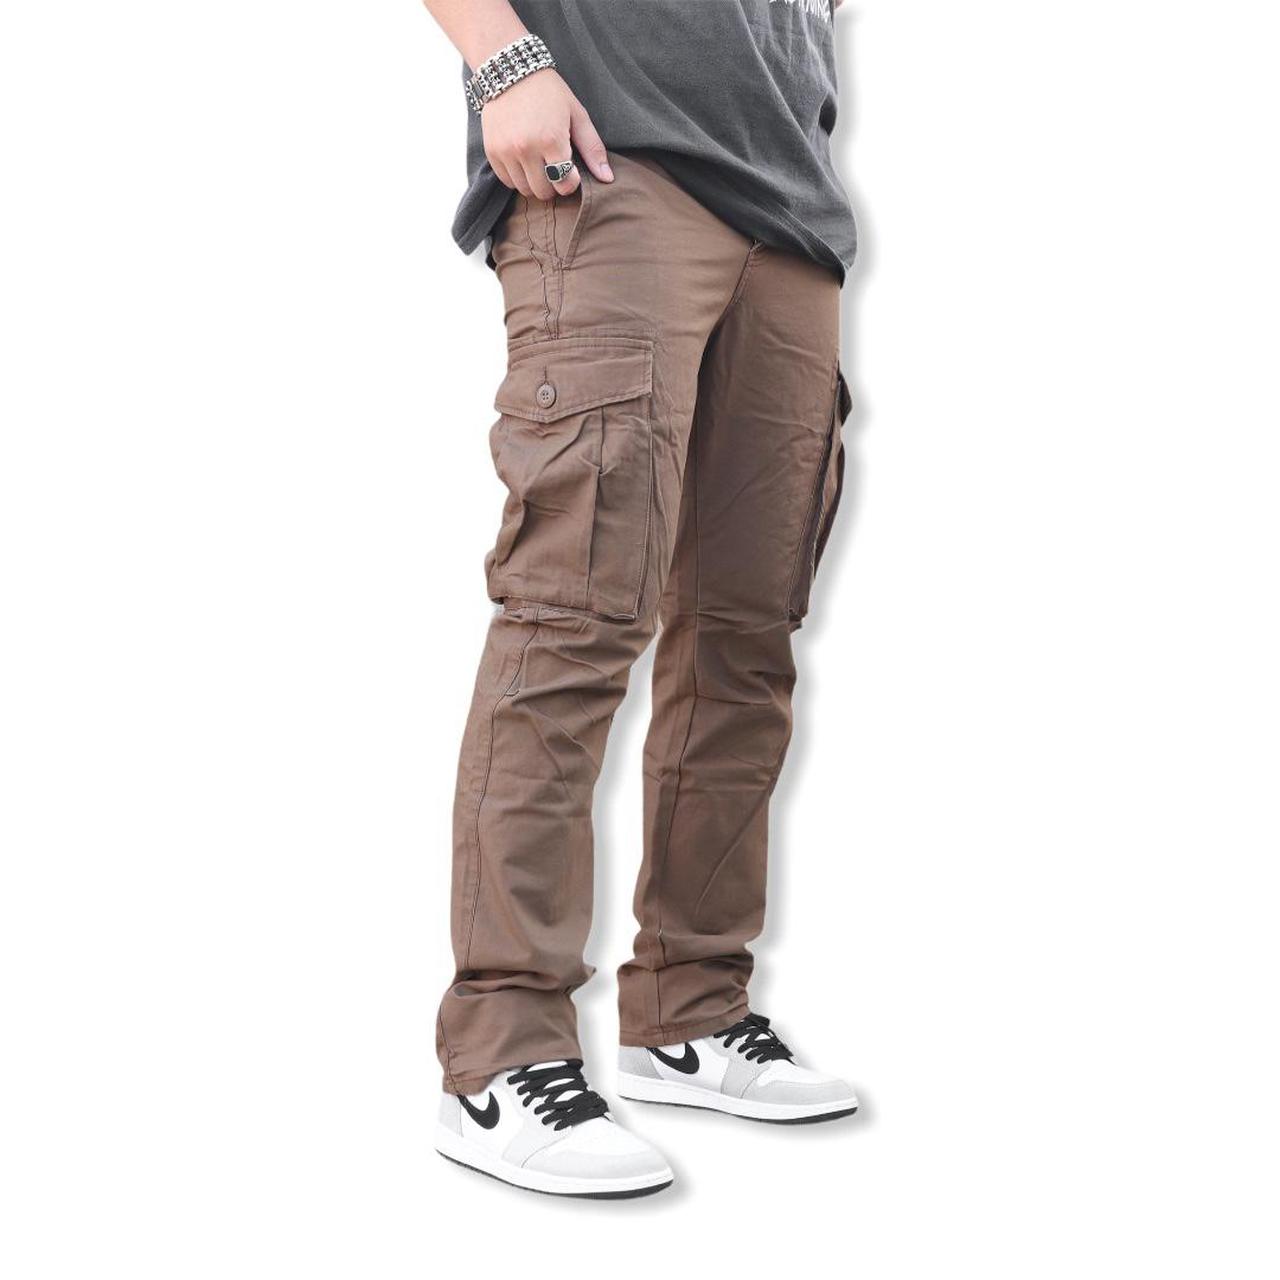 Product Image 2 - Cargo Pants Mocha Brown
• Sightly